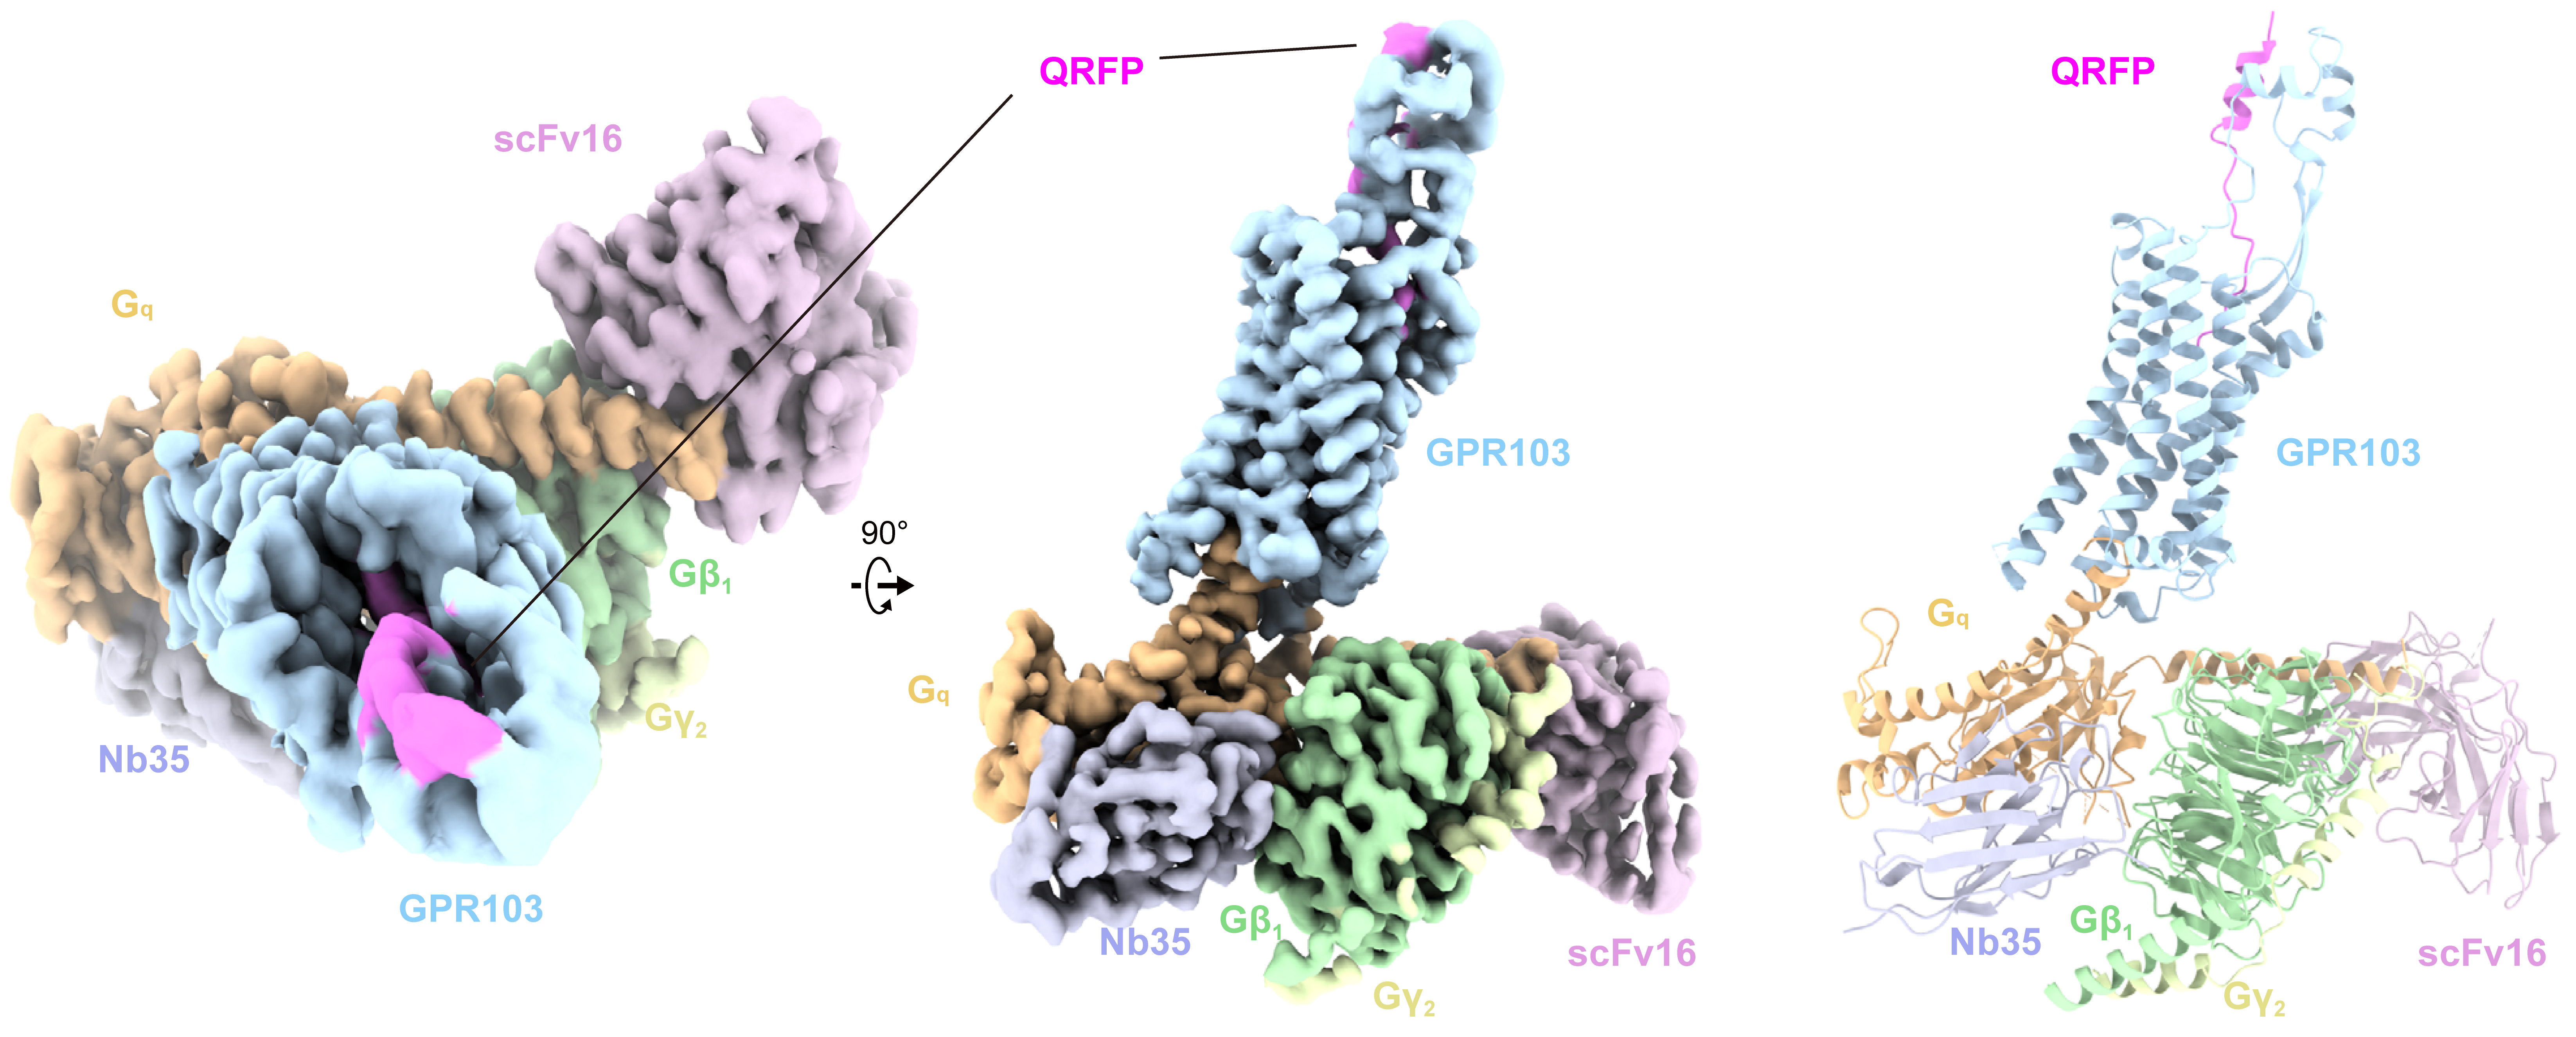 Elucidating the structure of the QRFP receptor, which regulates metabolism and appetite